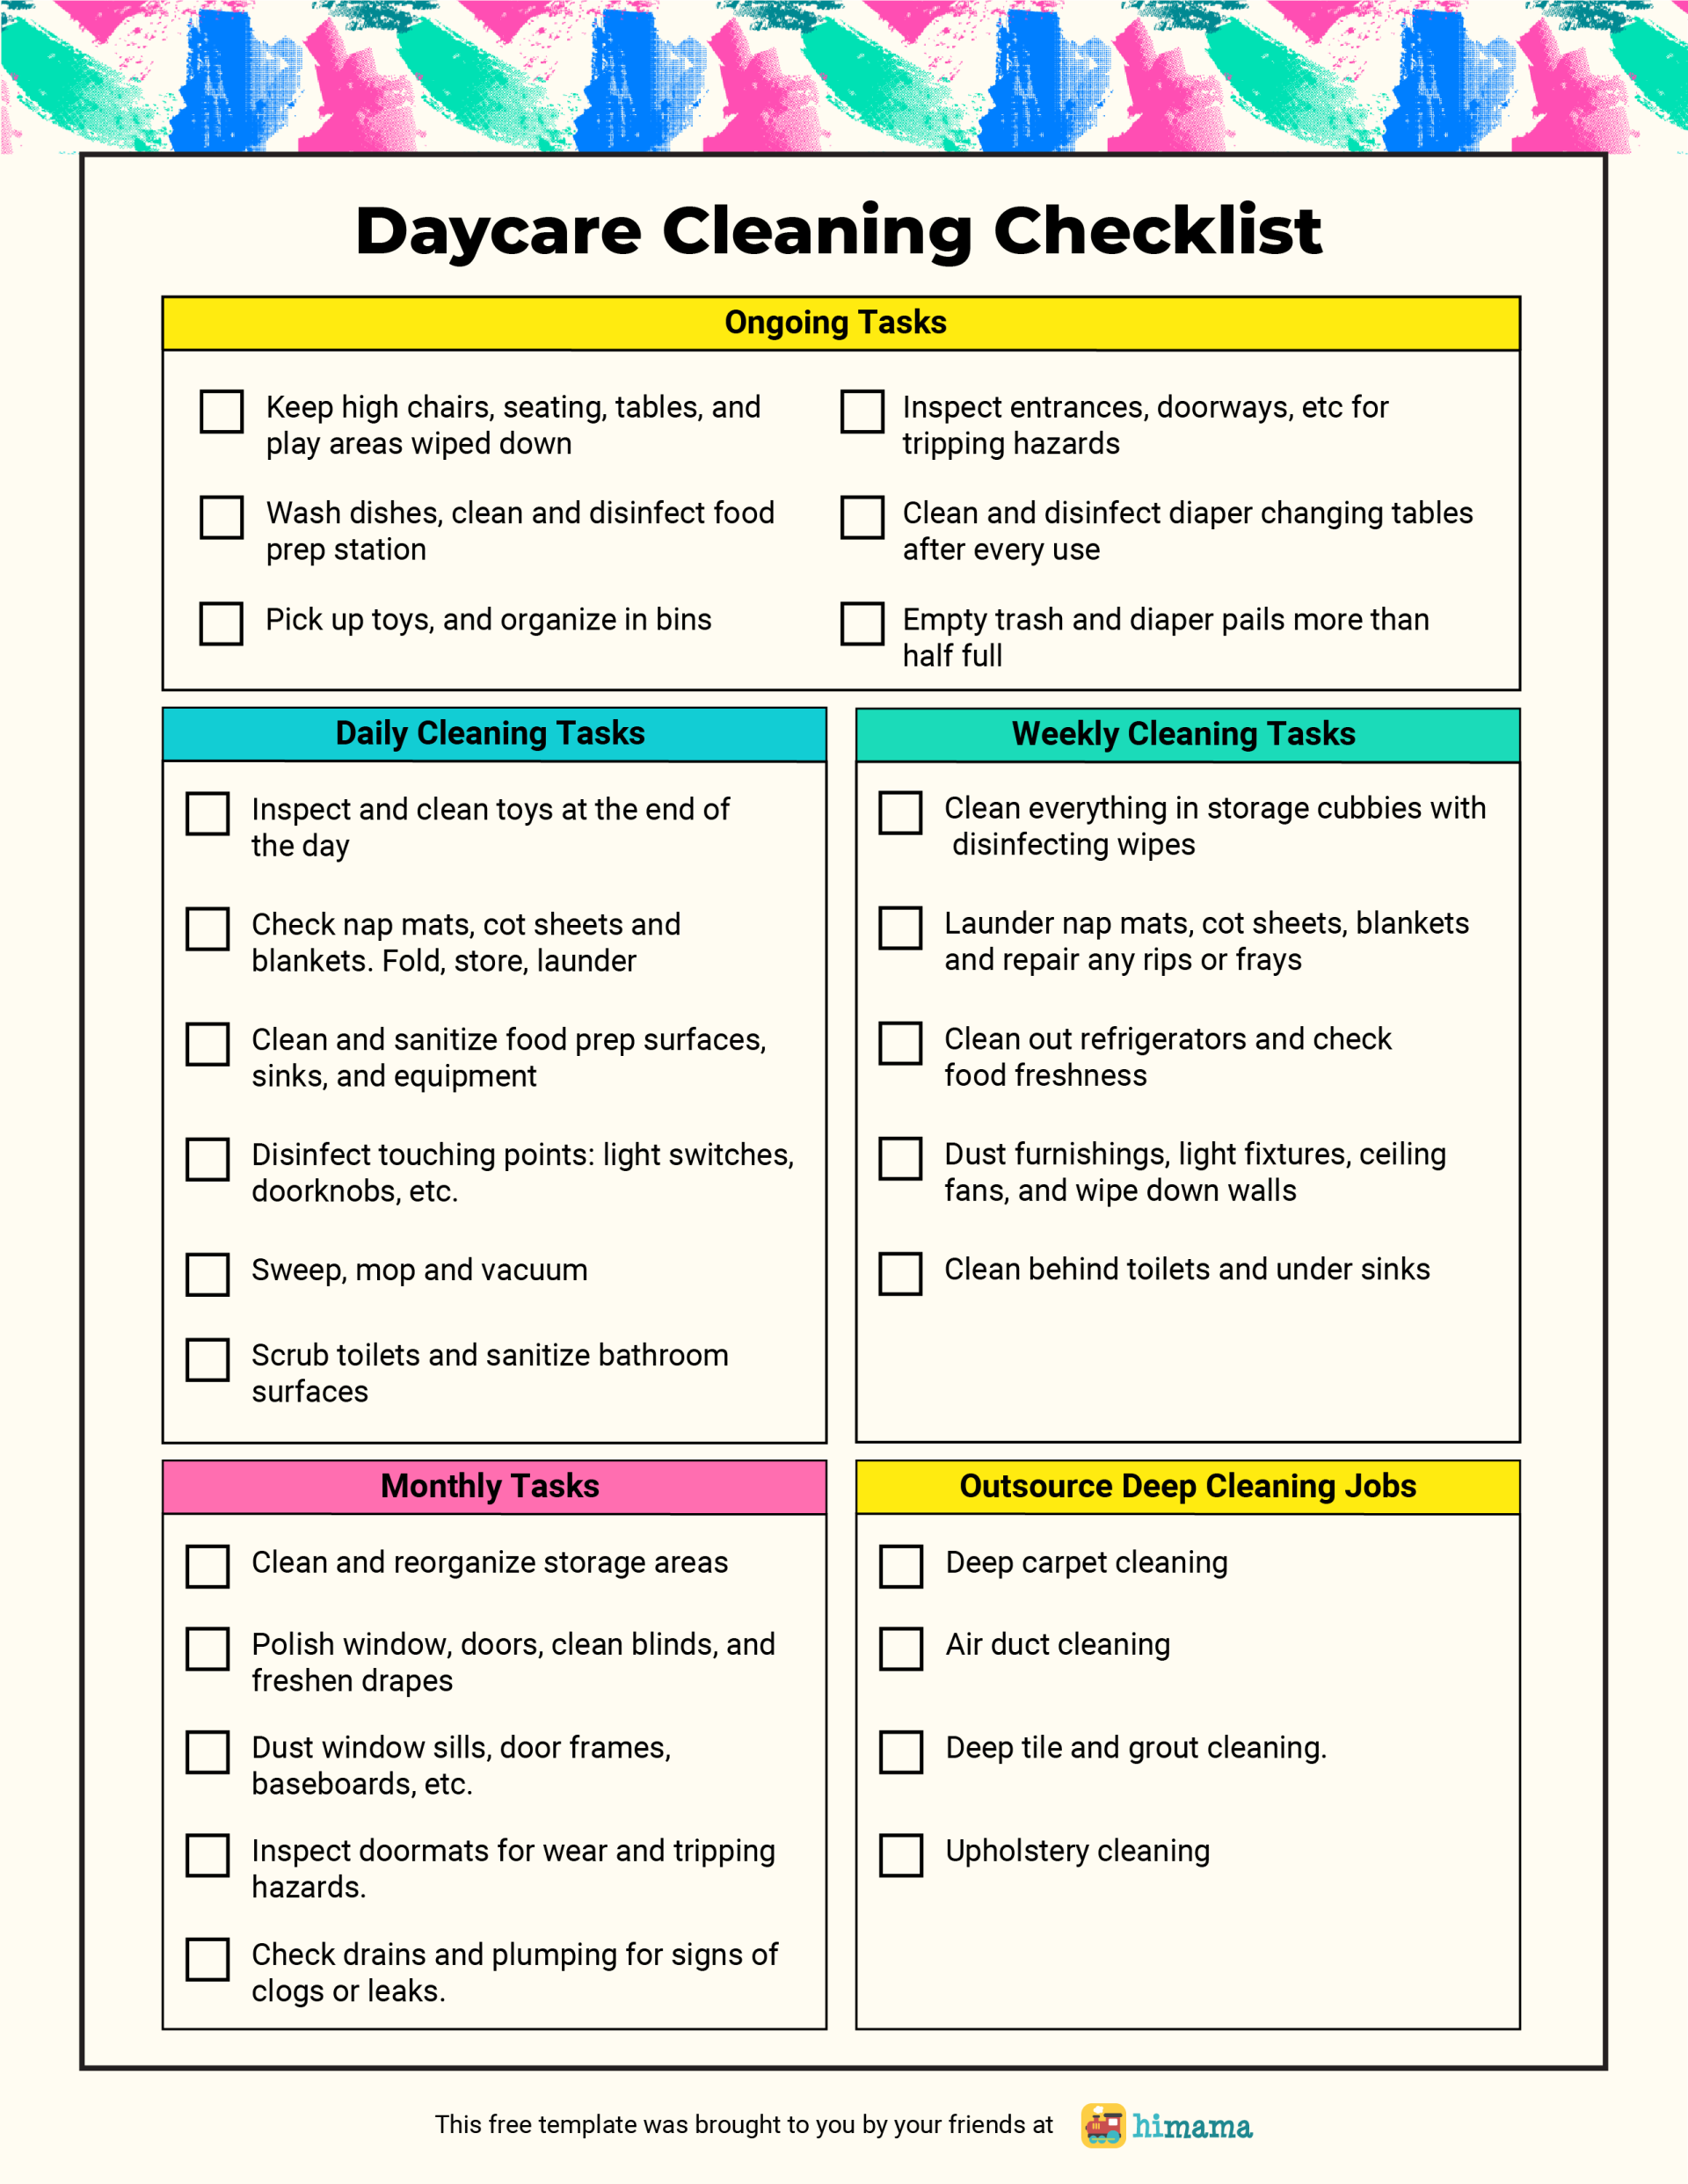 Daycare Cleaning Checklist Free Templates Himama